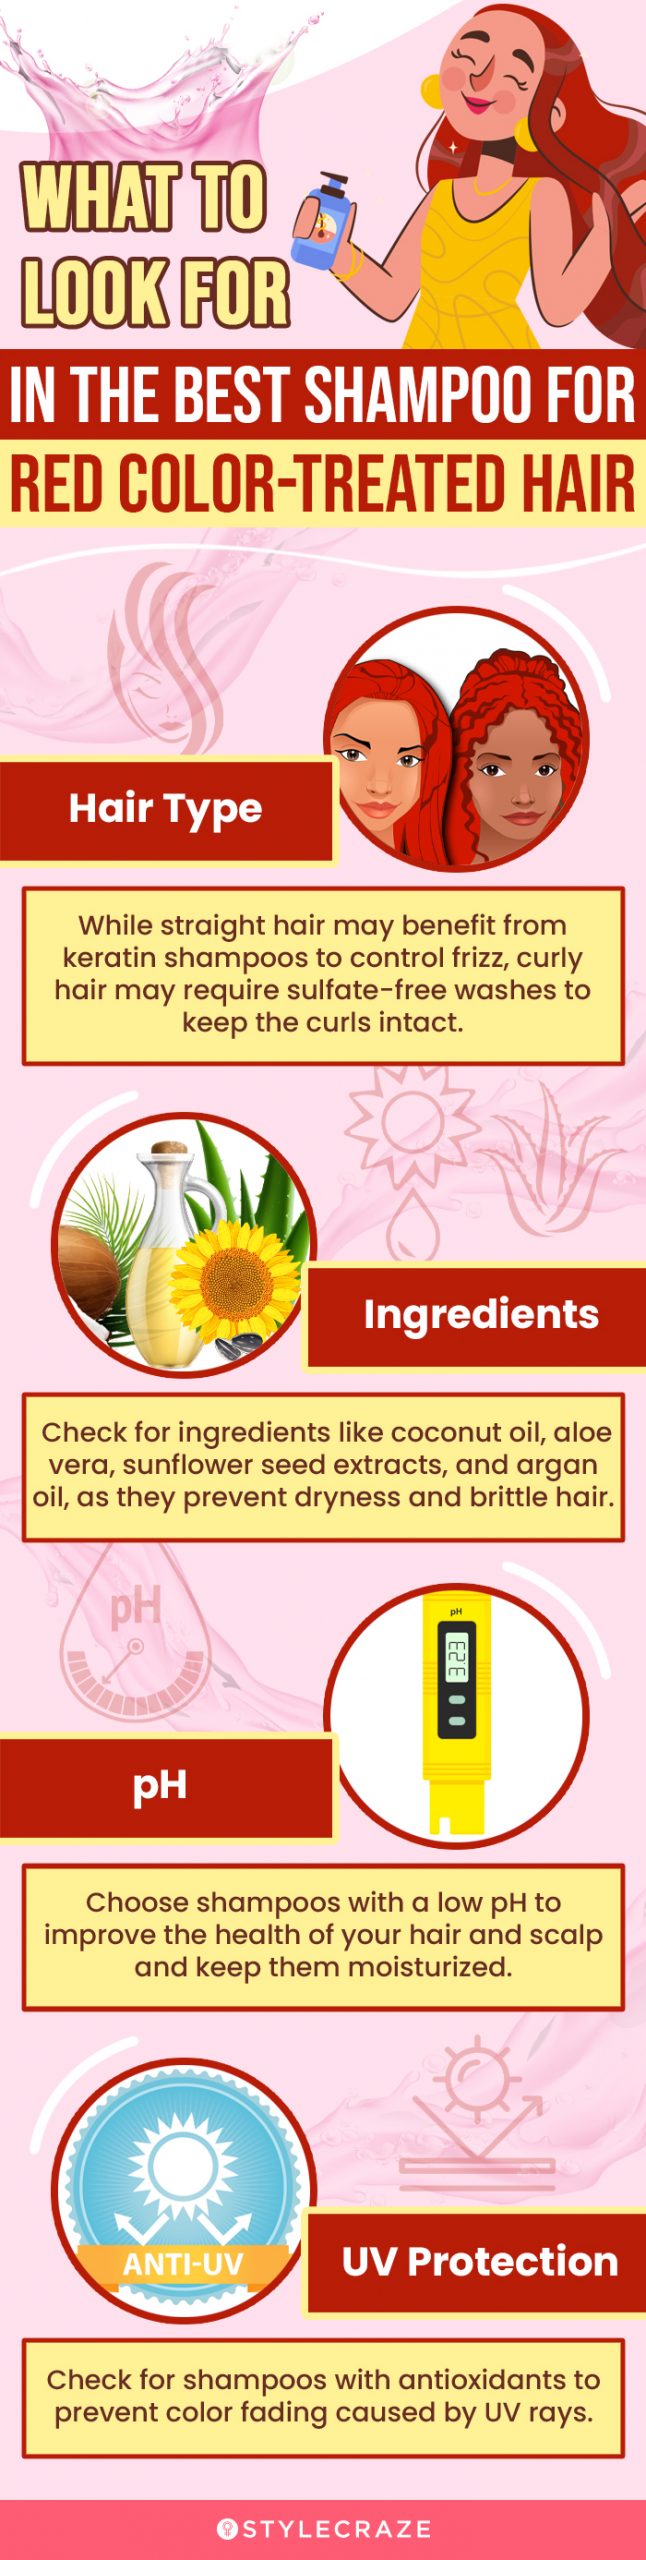 What To Look For In The Best Shampoo For Red Color-Treated H [infographic]